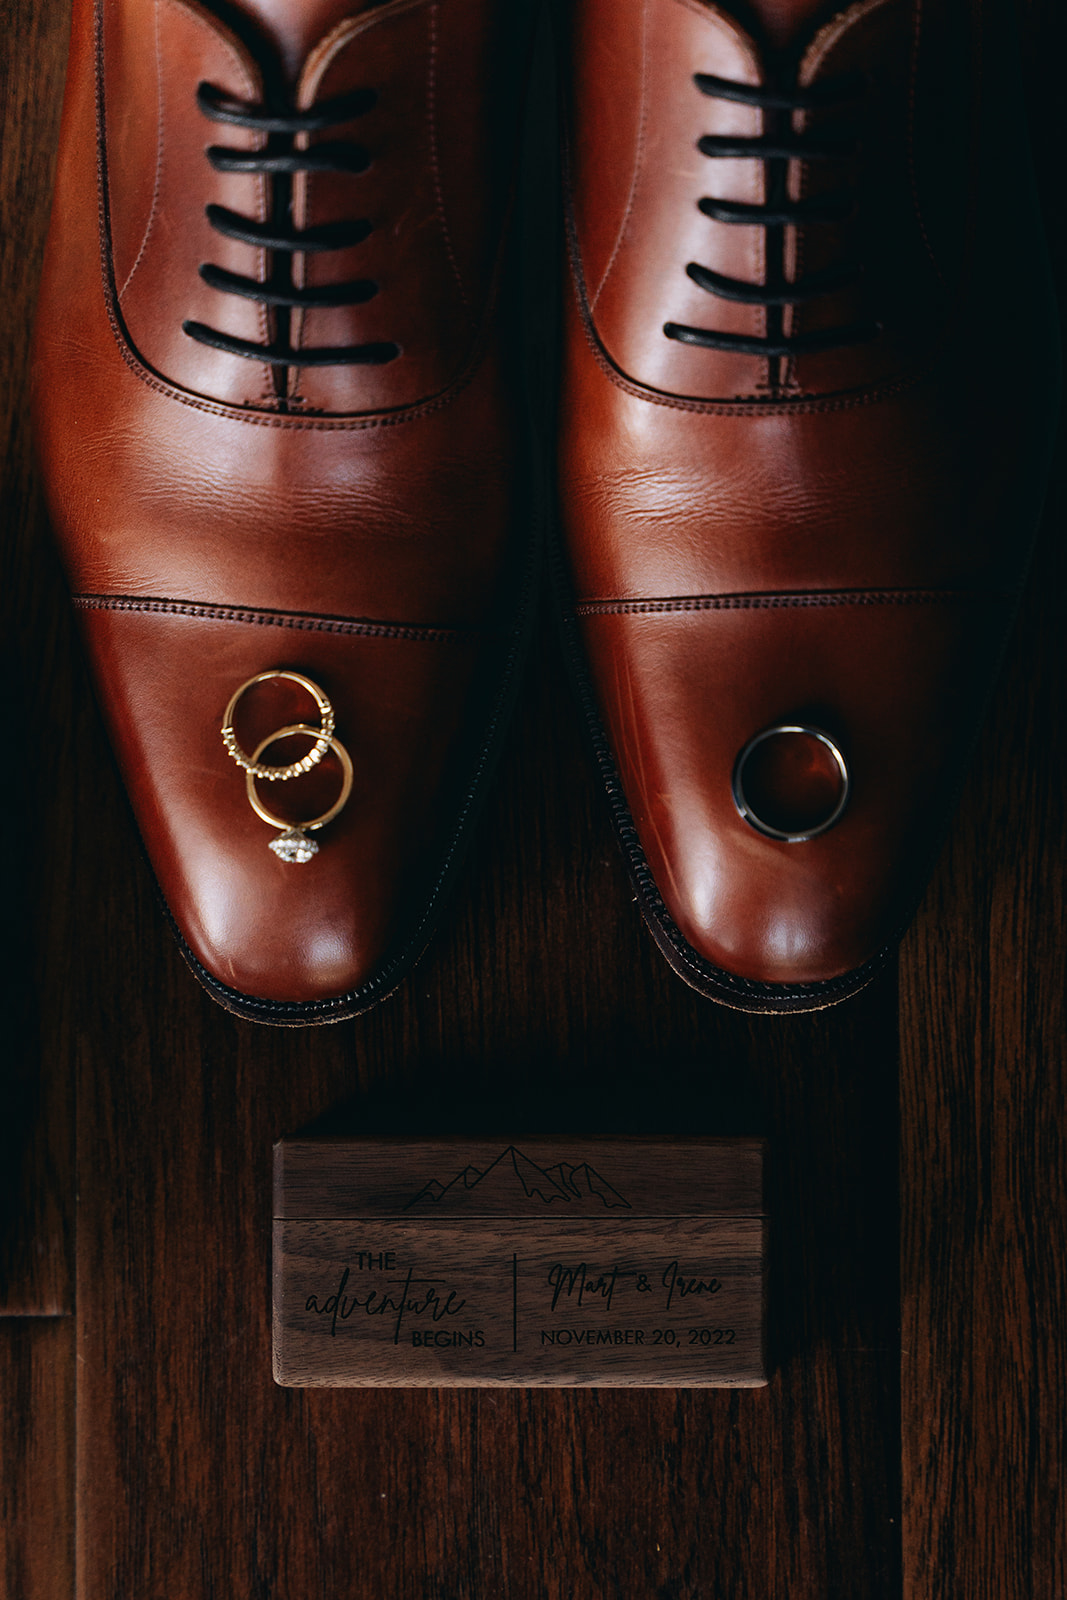 Grooms shoes with wedding rings